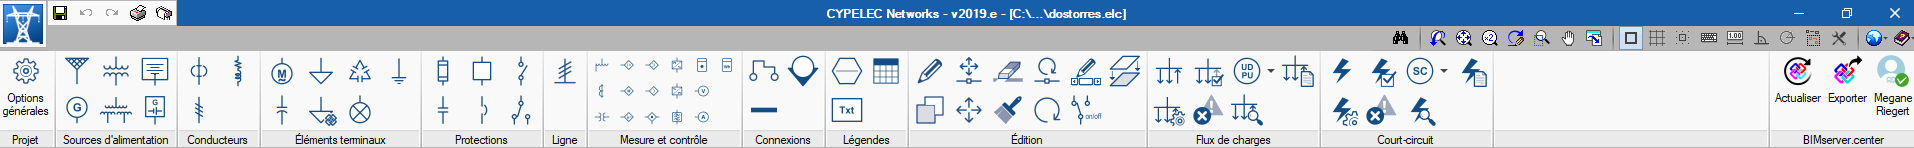 CYPELEC Networks. Interface